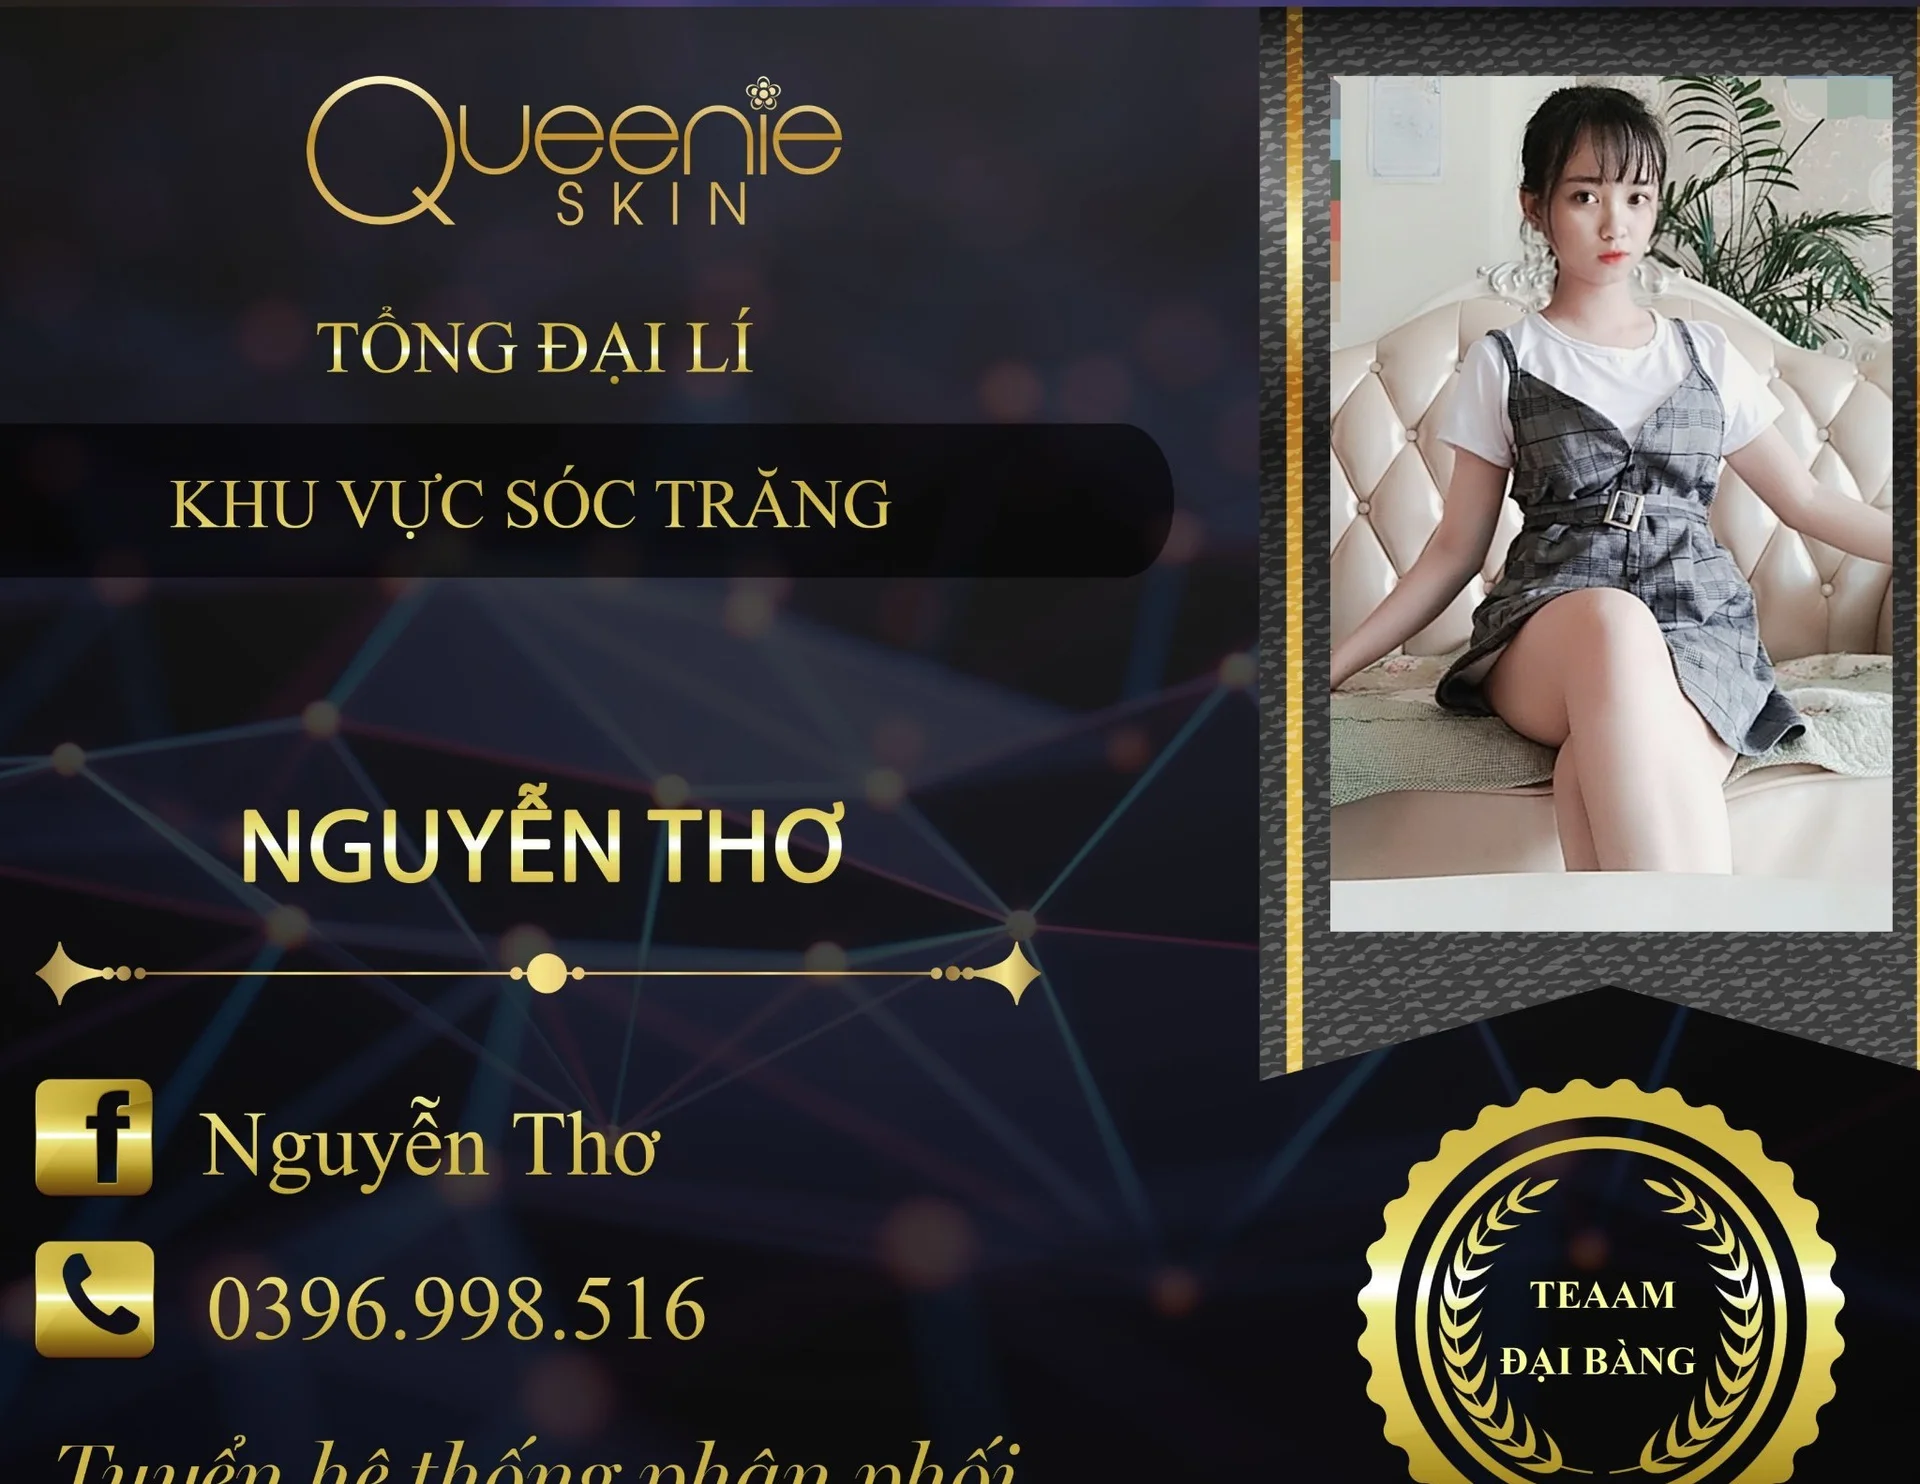 Anh Thơ Nguyễn's cover photo